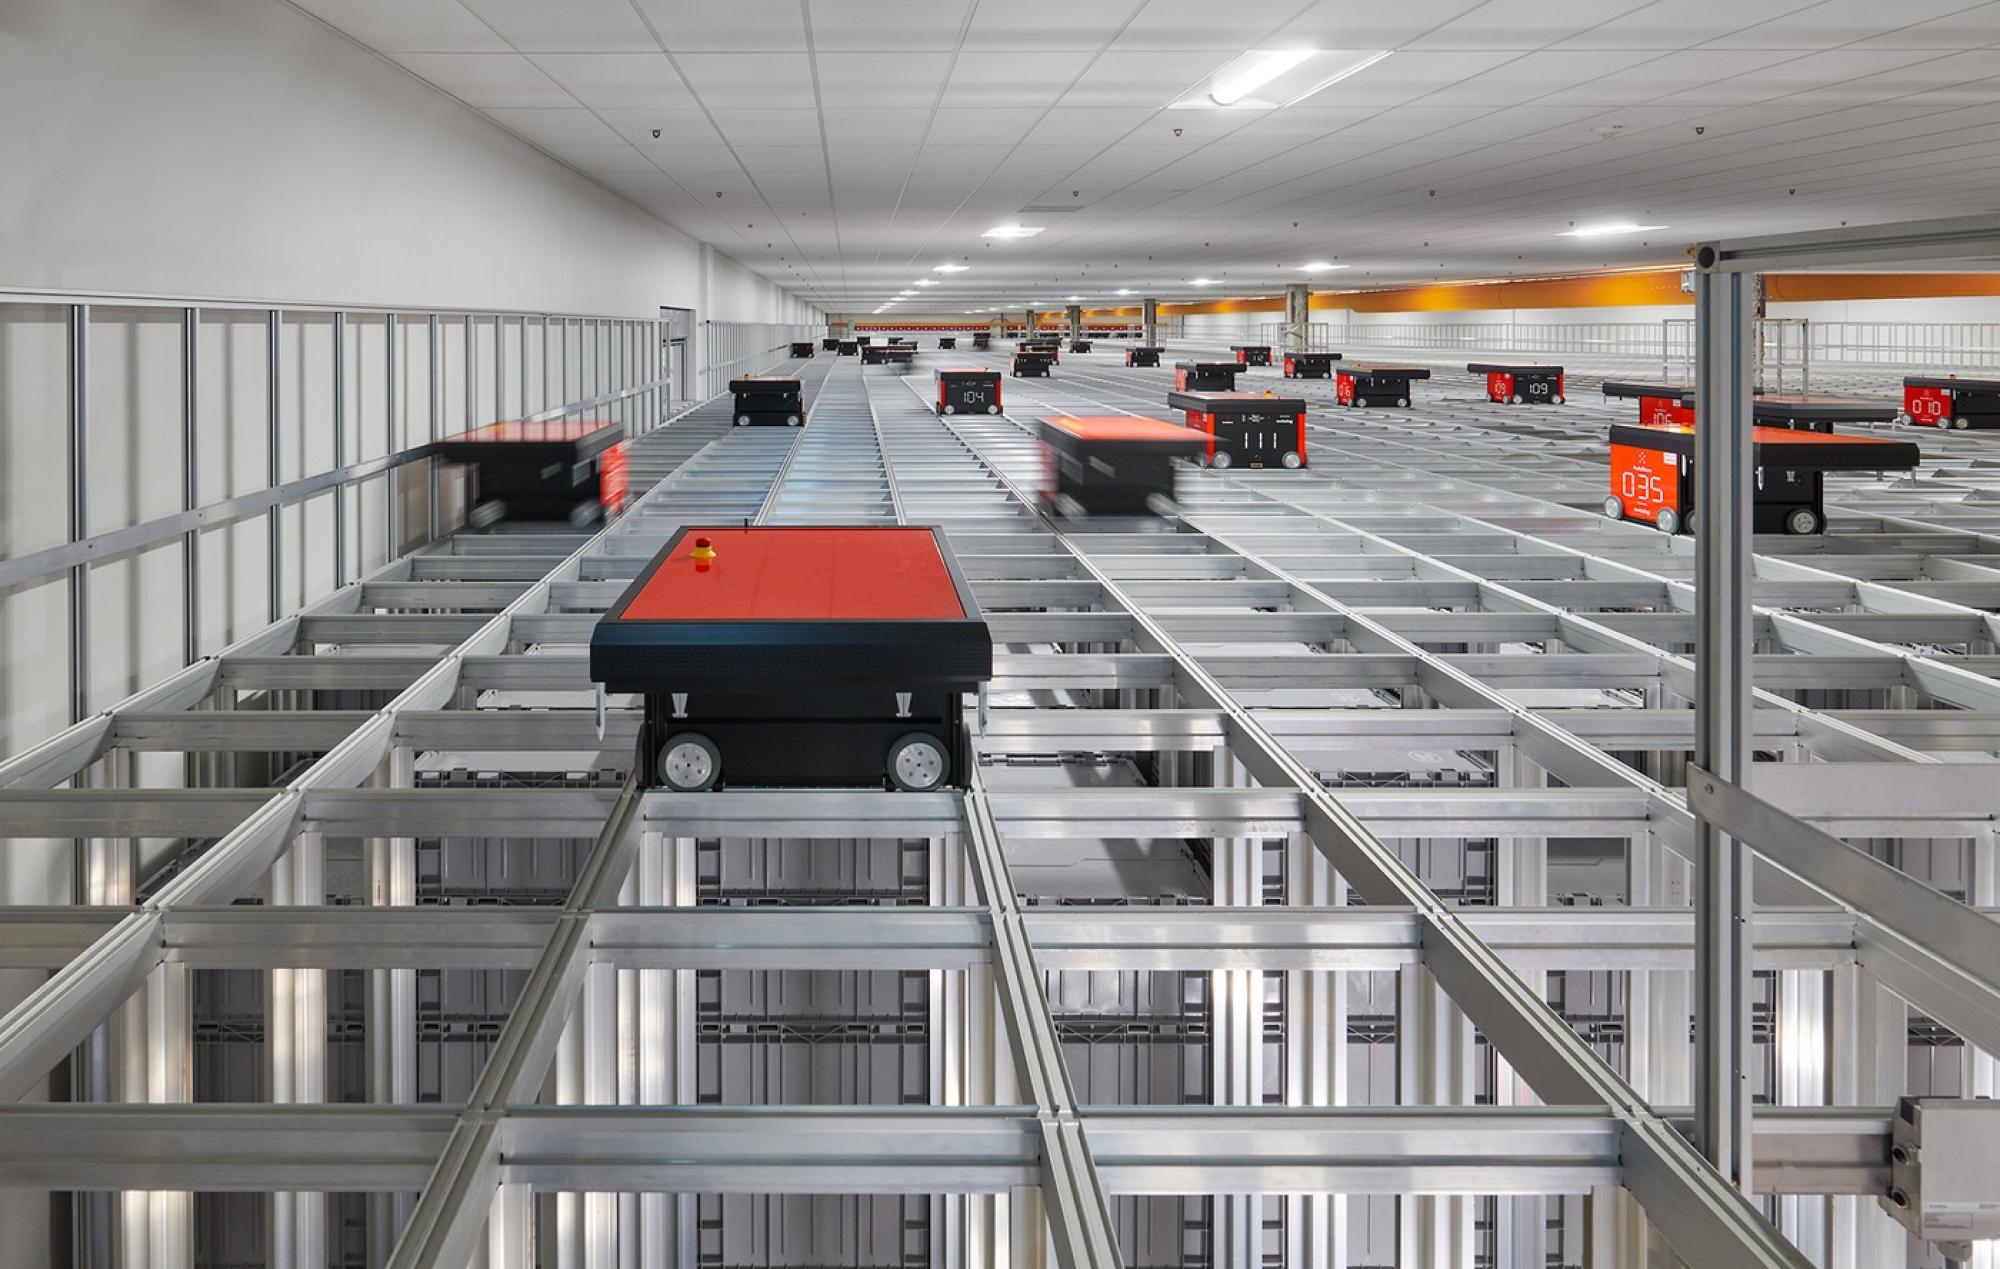 Inside the FBI's Central Records Complex in Winchester, Virginia, wheeled robots file away millions of paper records from FBI offices around the country